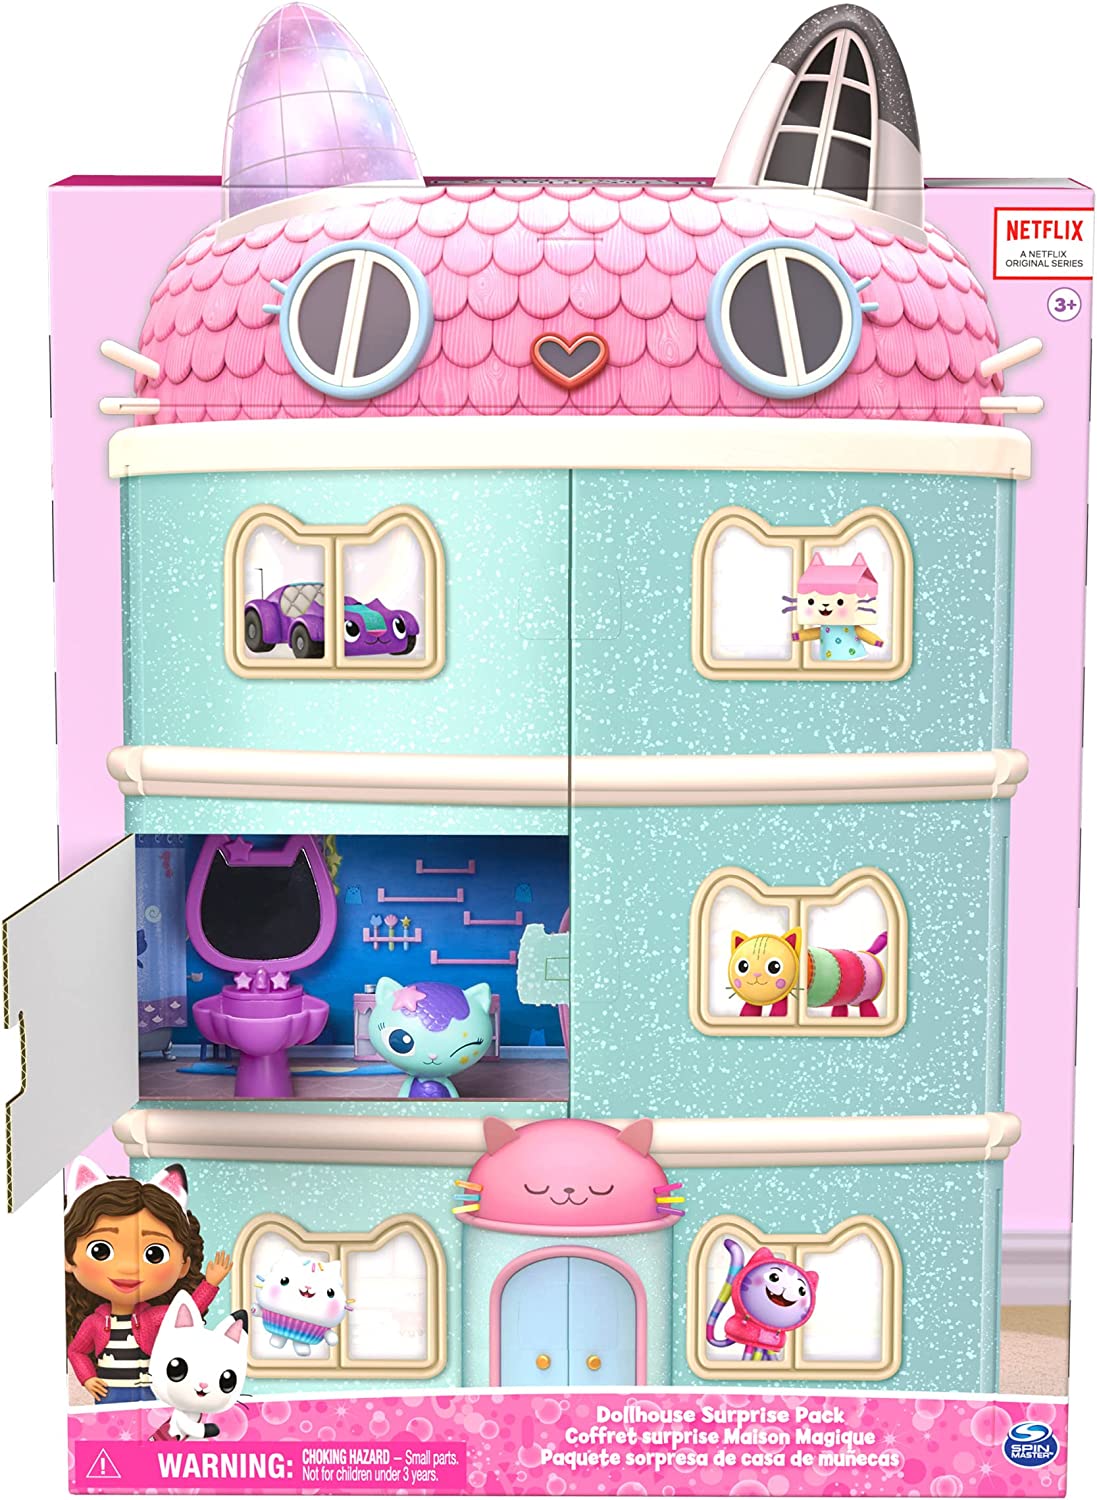 GABBY’S PURRFECT DOLLHOUSE Dreamworks Spin Master Netflix Brand New In Hand 